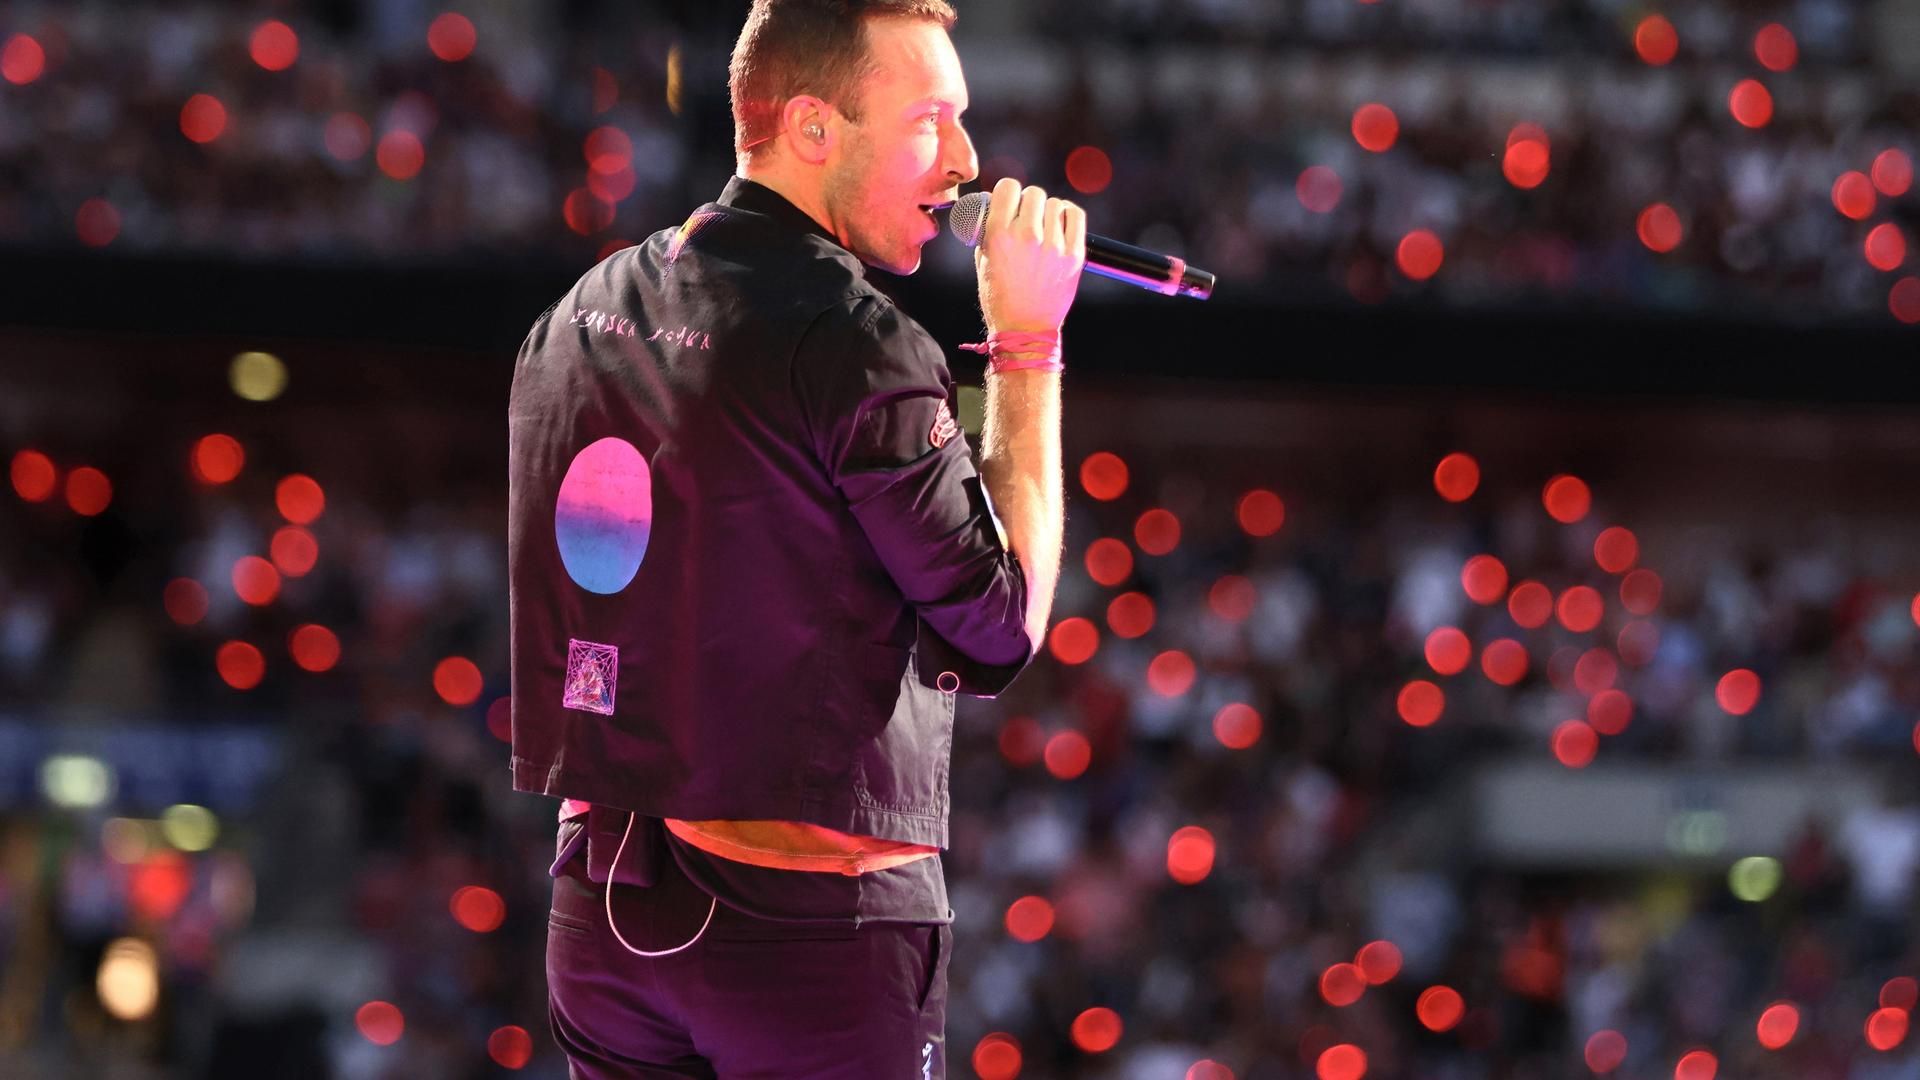 Coldplay dedicates their live performance in Barcelona to Tina Turner